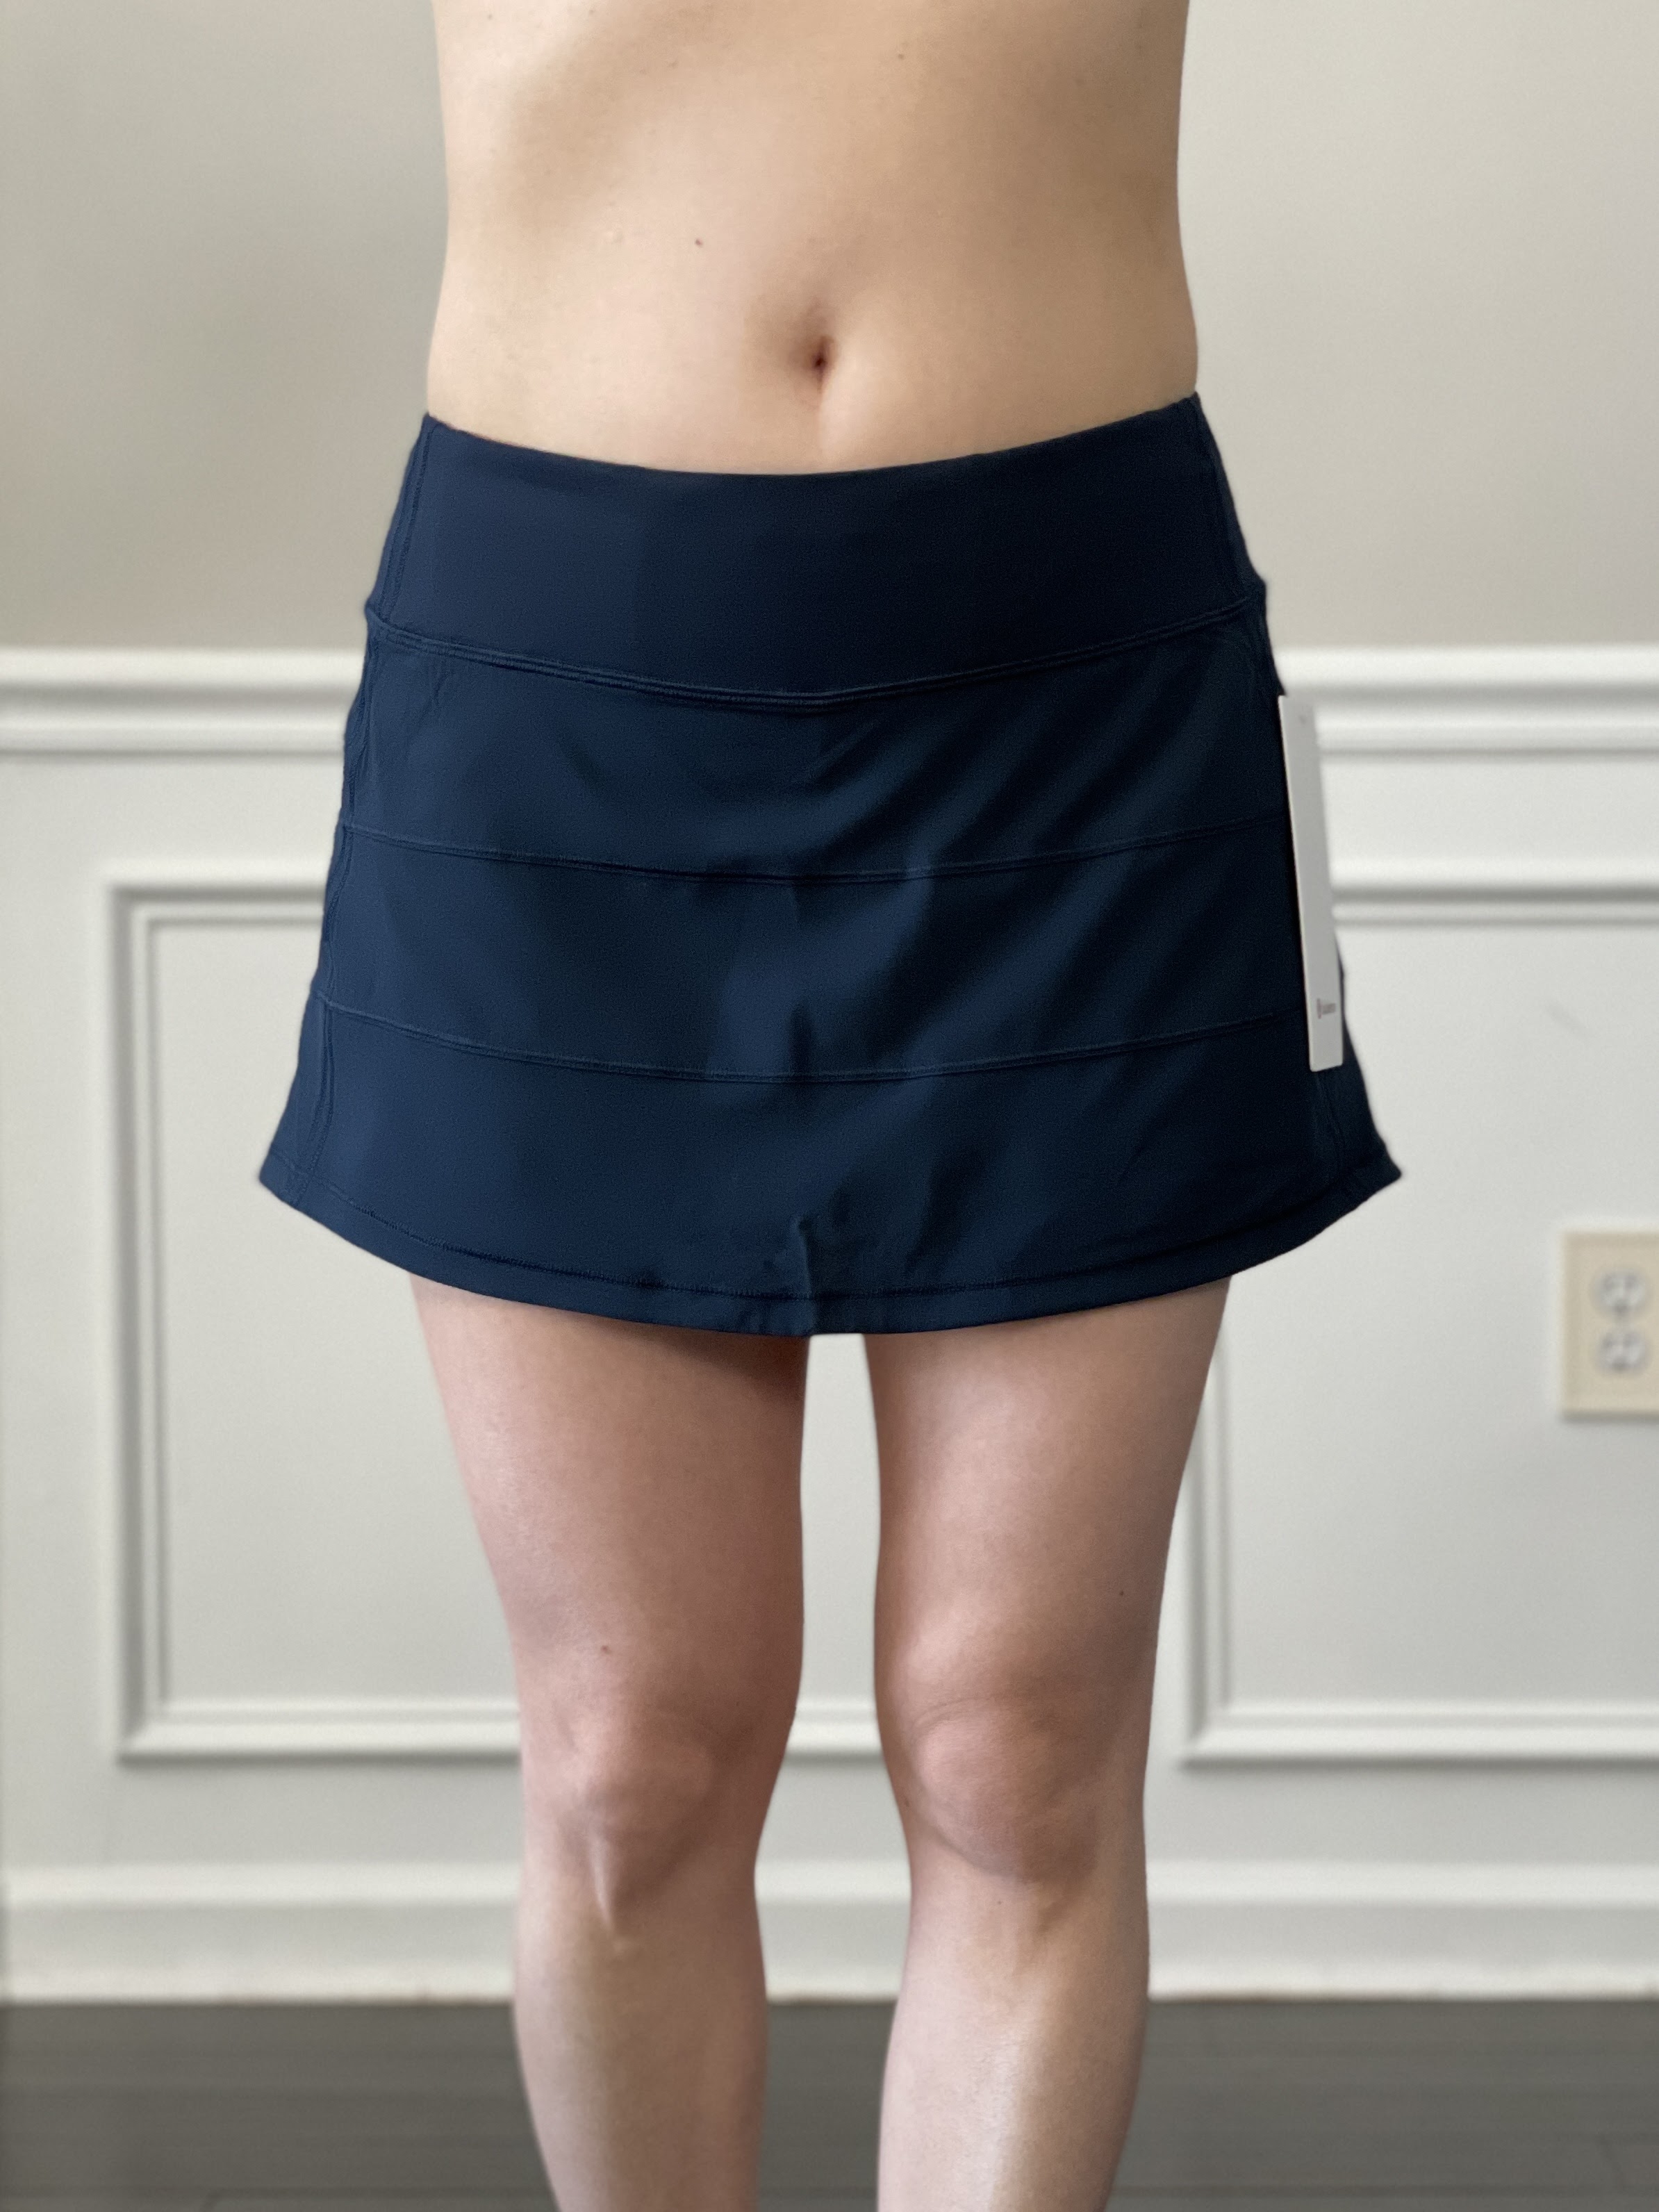 Fit Request Friday! Pace Rival Mid Rise Skirt vs Tall